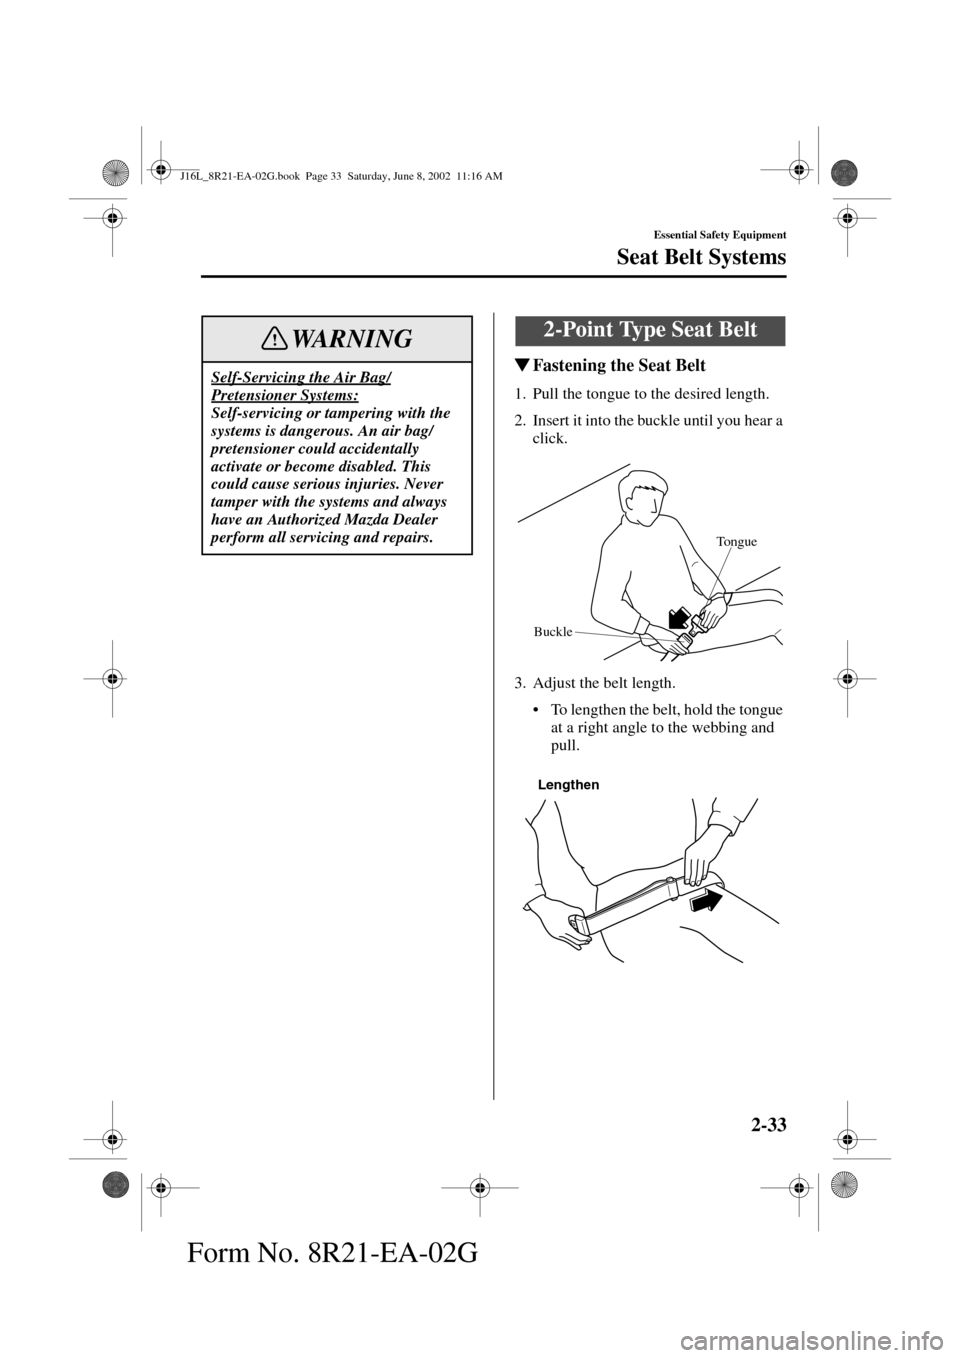 MAZDA MODEL MPV 2003  Owners Manual (in English) 2-33
Essential Safety Equipment
Seat Belt Systems
Form No. 8R21-EA-02G
Fastening the Seat Belt
1. Pull the tongue to the desired length.
2. Insert it into the buckle until you hear a 
click.
3. Adjus